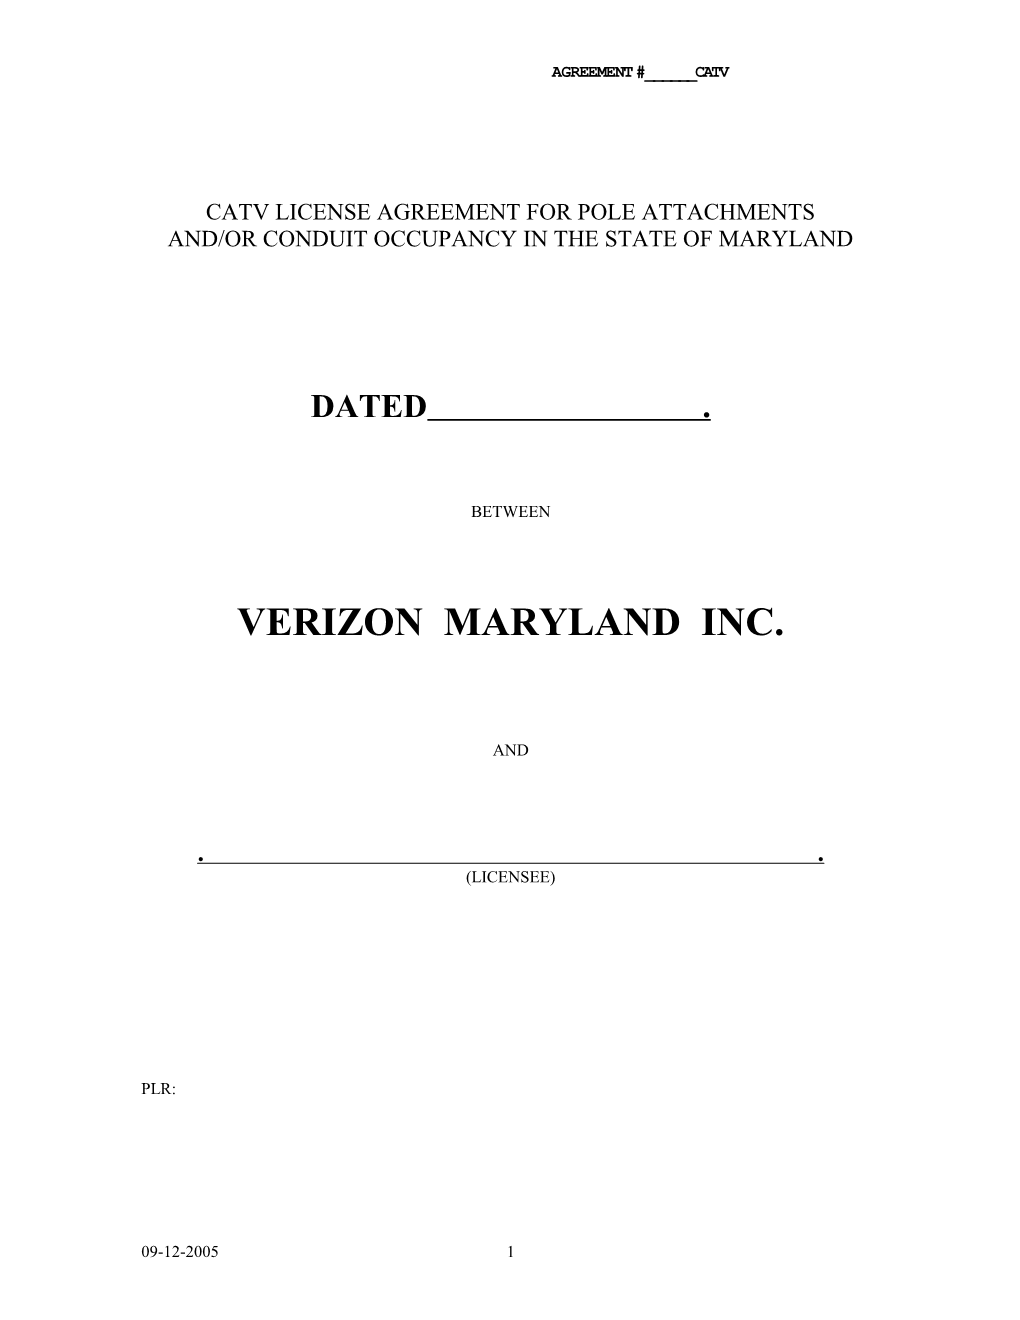 Catv License Agreement for Pole Attachments